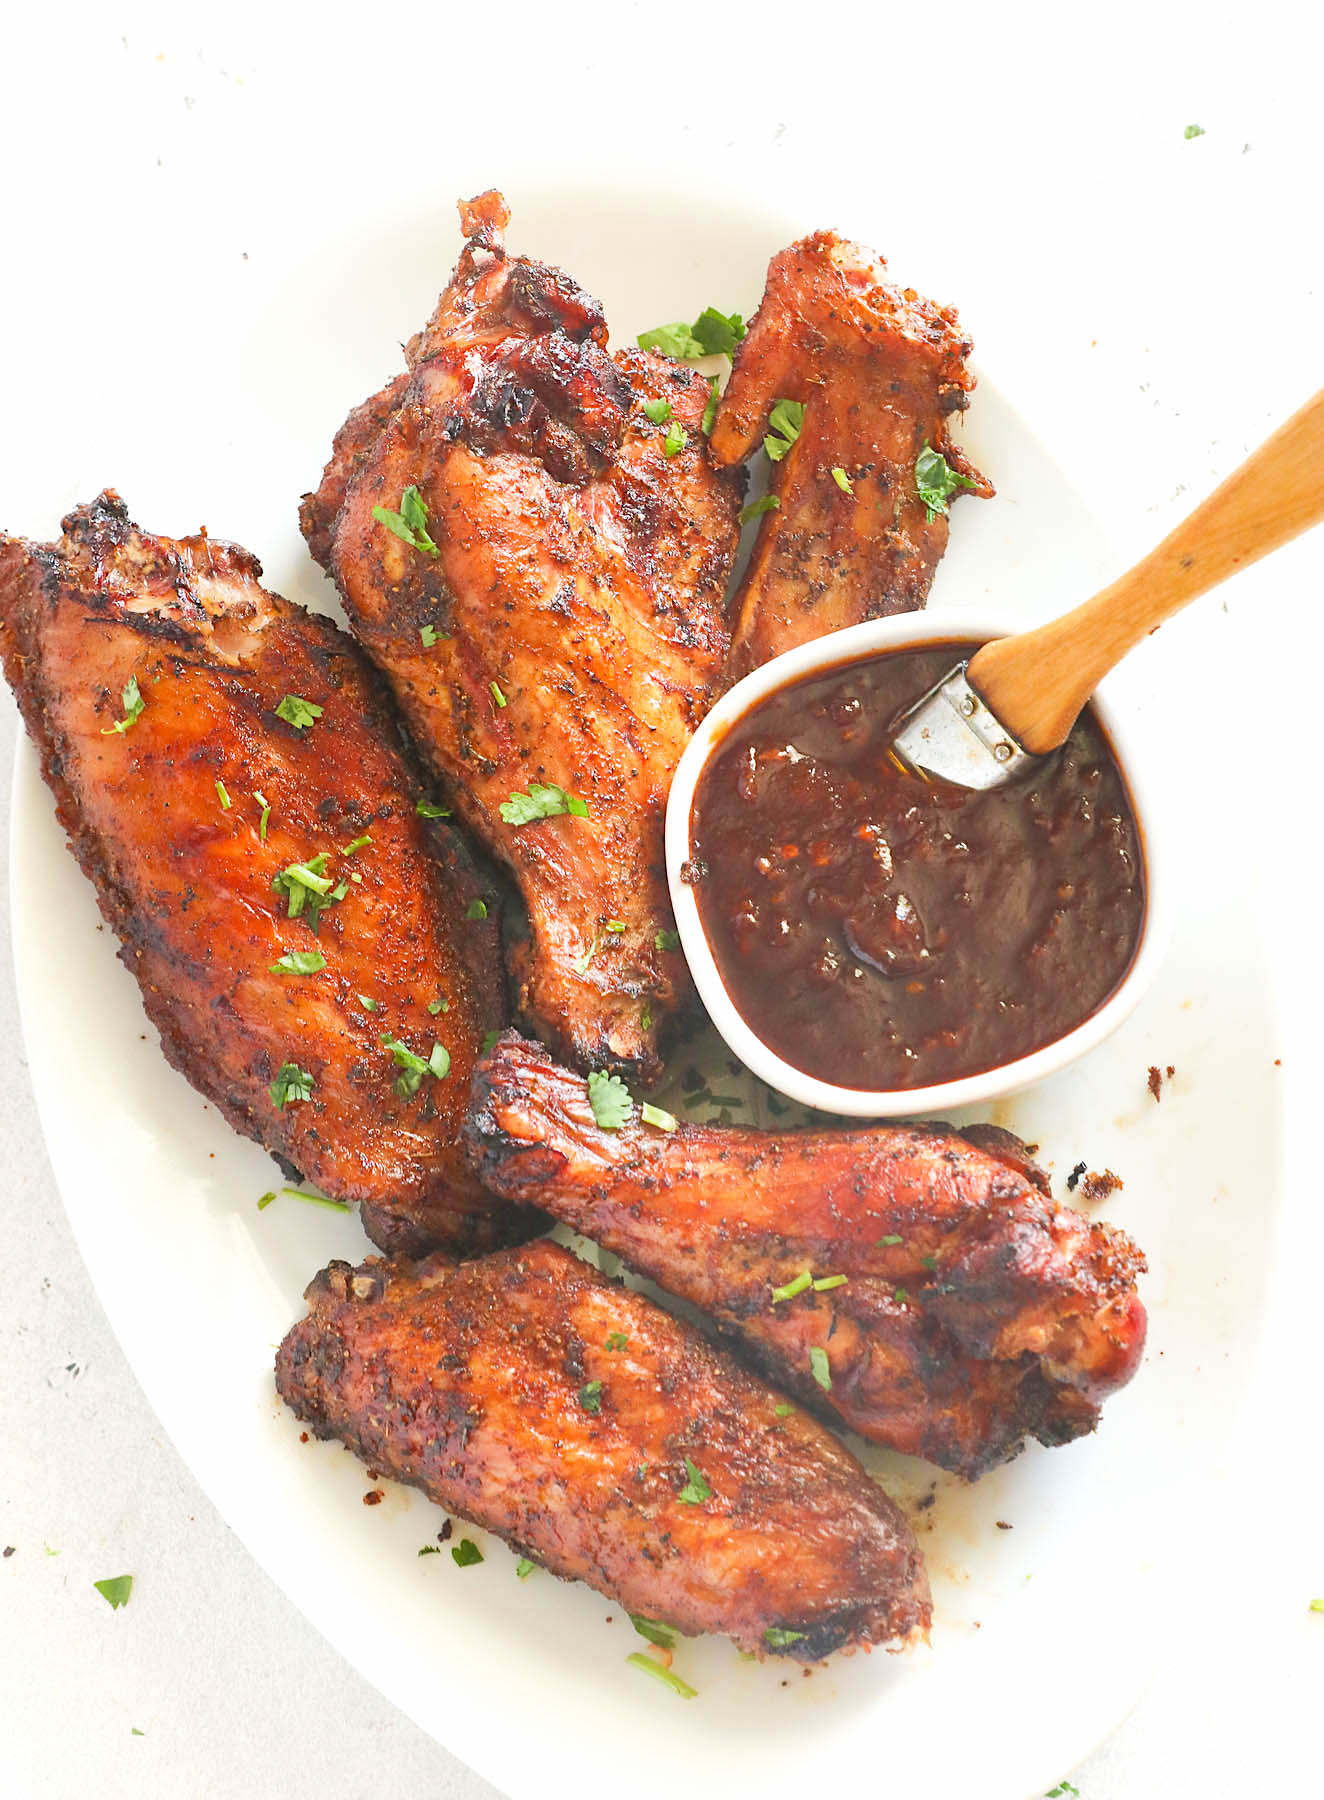 Basting crazy delicious smoked turkey wings with BBQ sauce